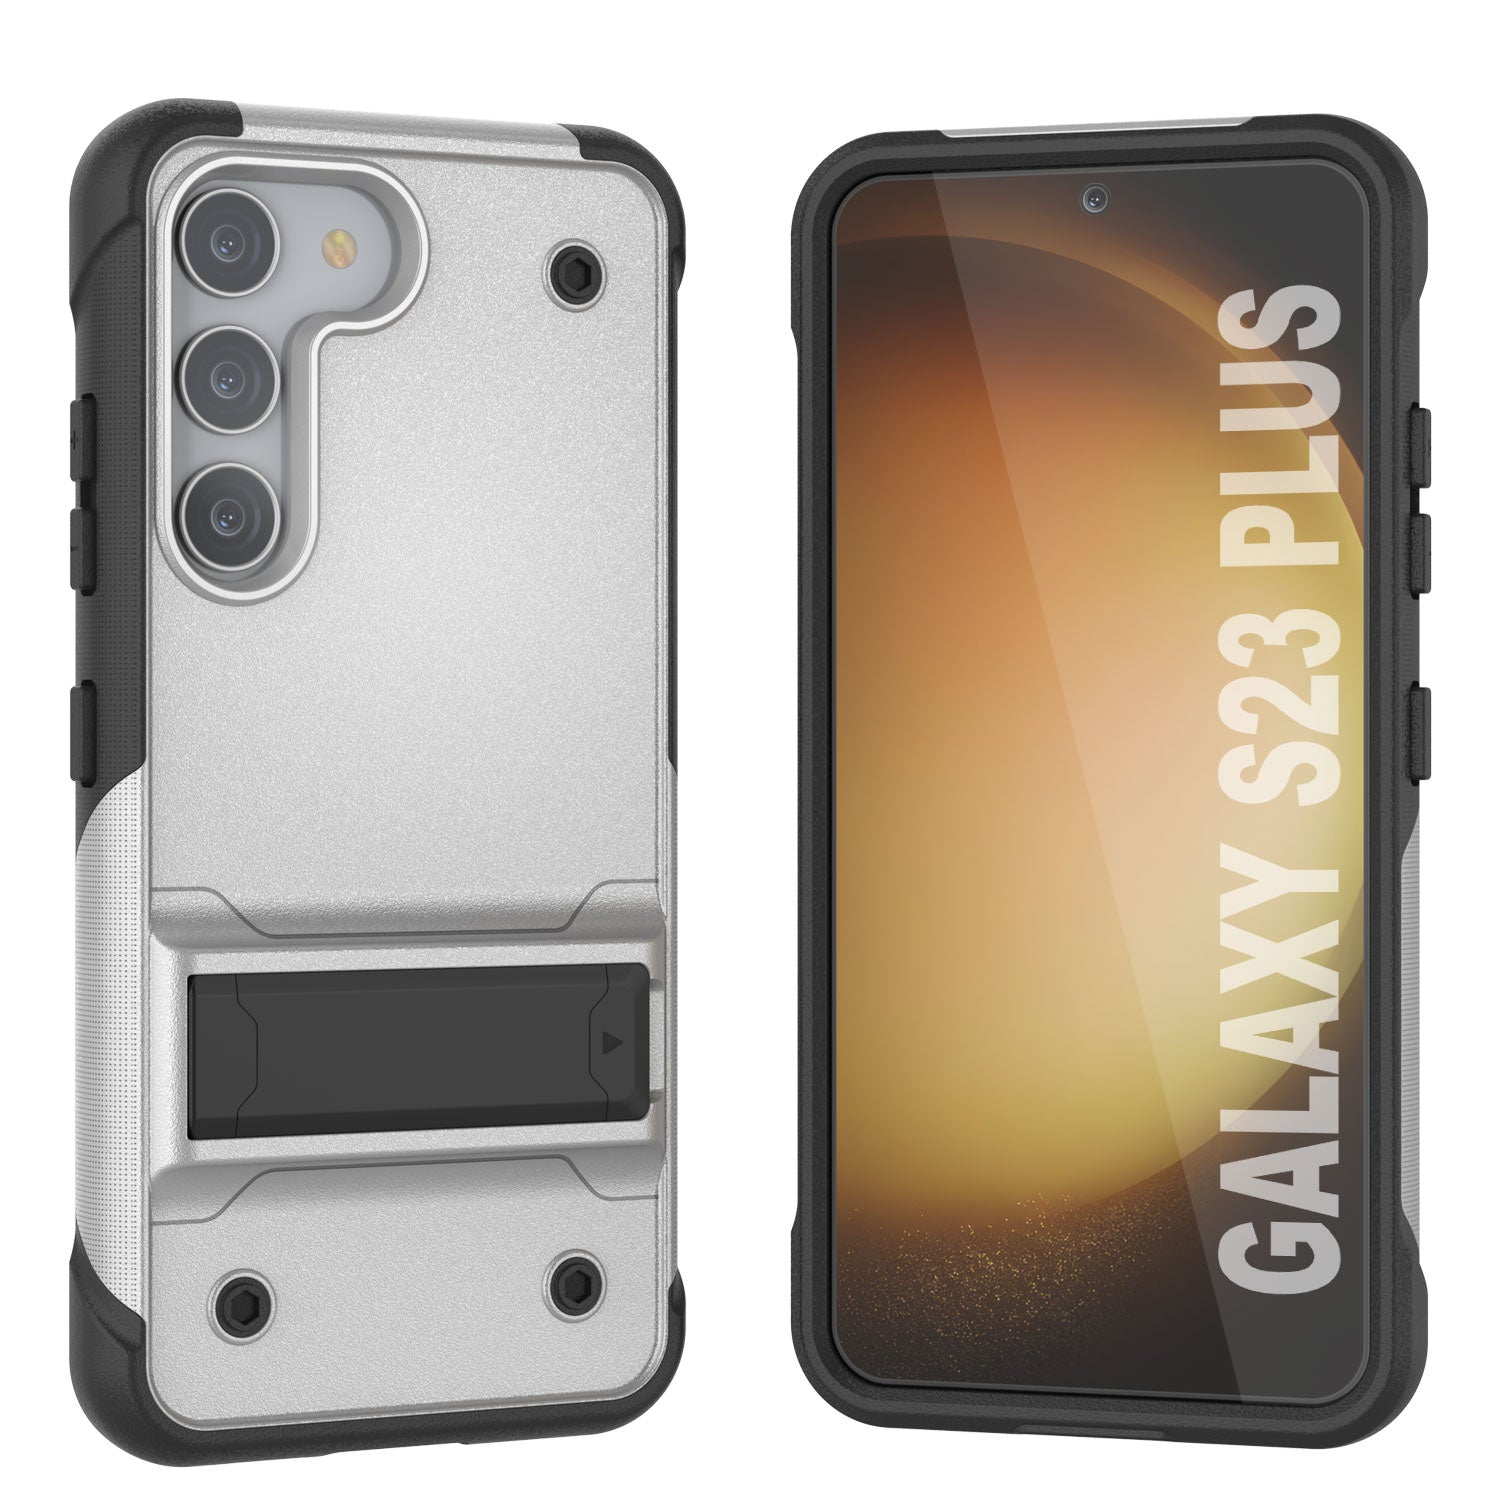 Punkcase Galaxy S23+ Plus Case [Reliance Series] Protective Hybrid Military Grade Cover W/Built-in Kickstand [White-Black]